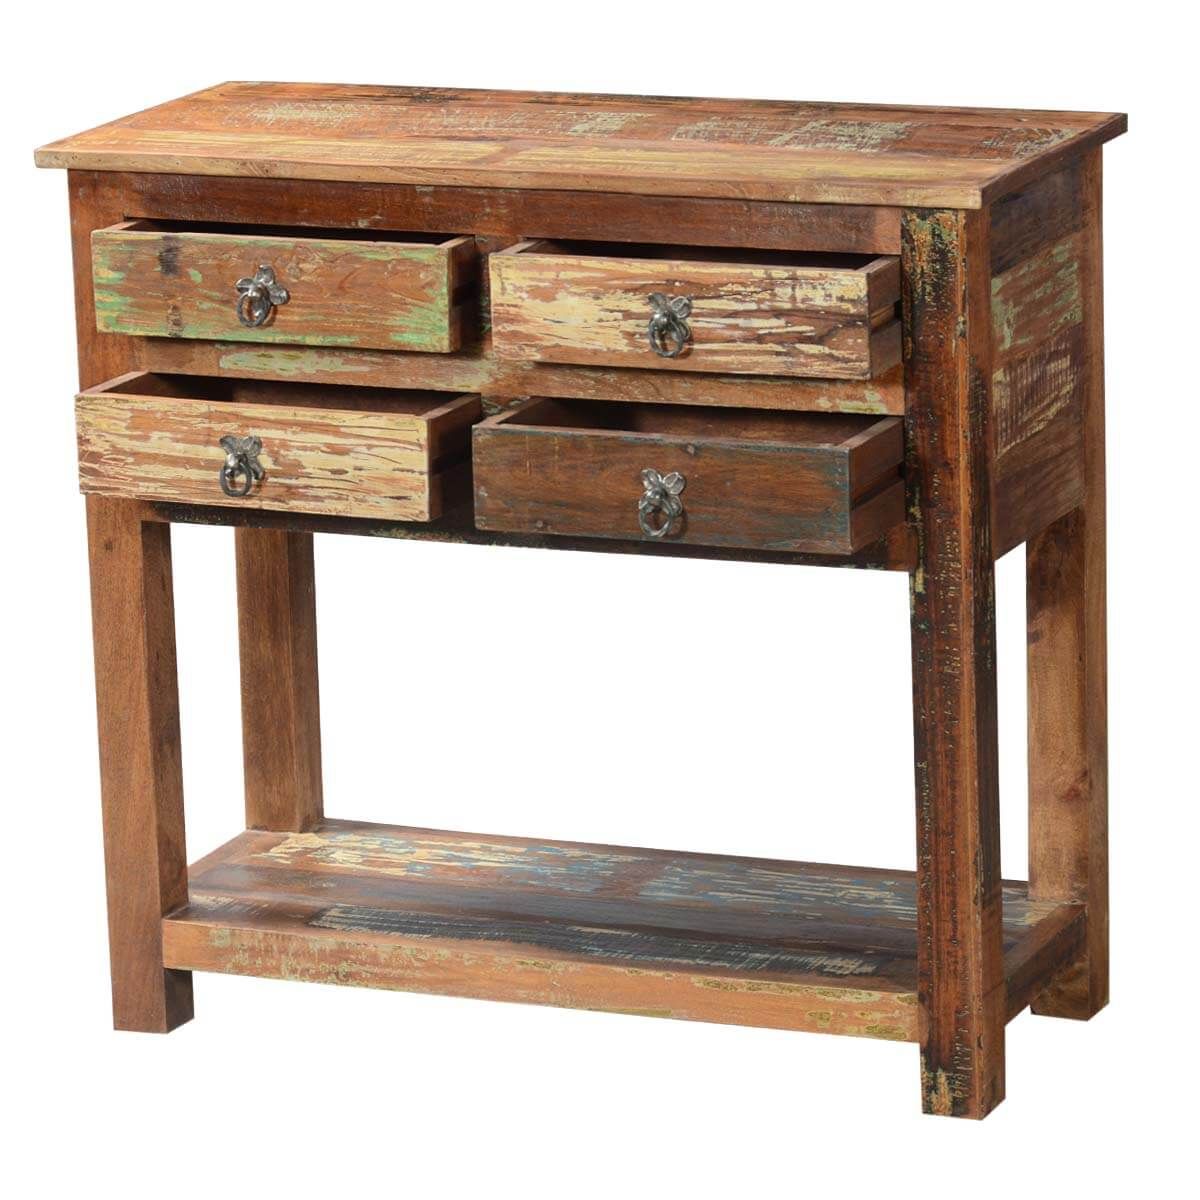 Ashland Rustic Reclaimed Wood 4 Drawer Hallway Console Table Pertaining To Rustic Espresso Wood Console Tables (View 1 of 20)